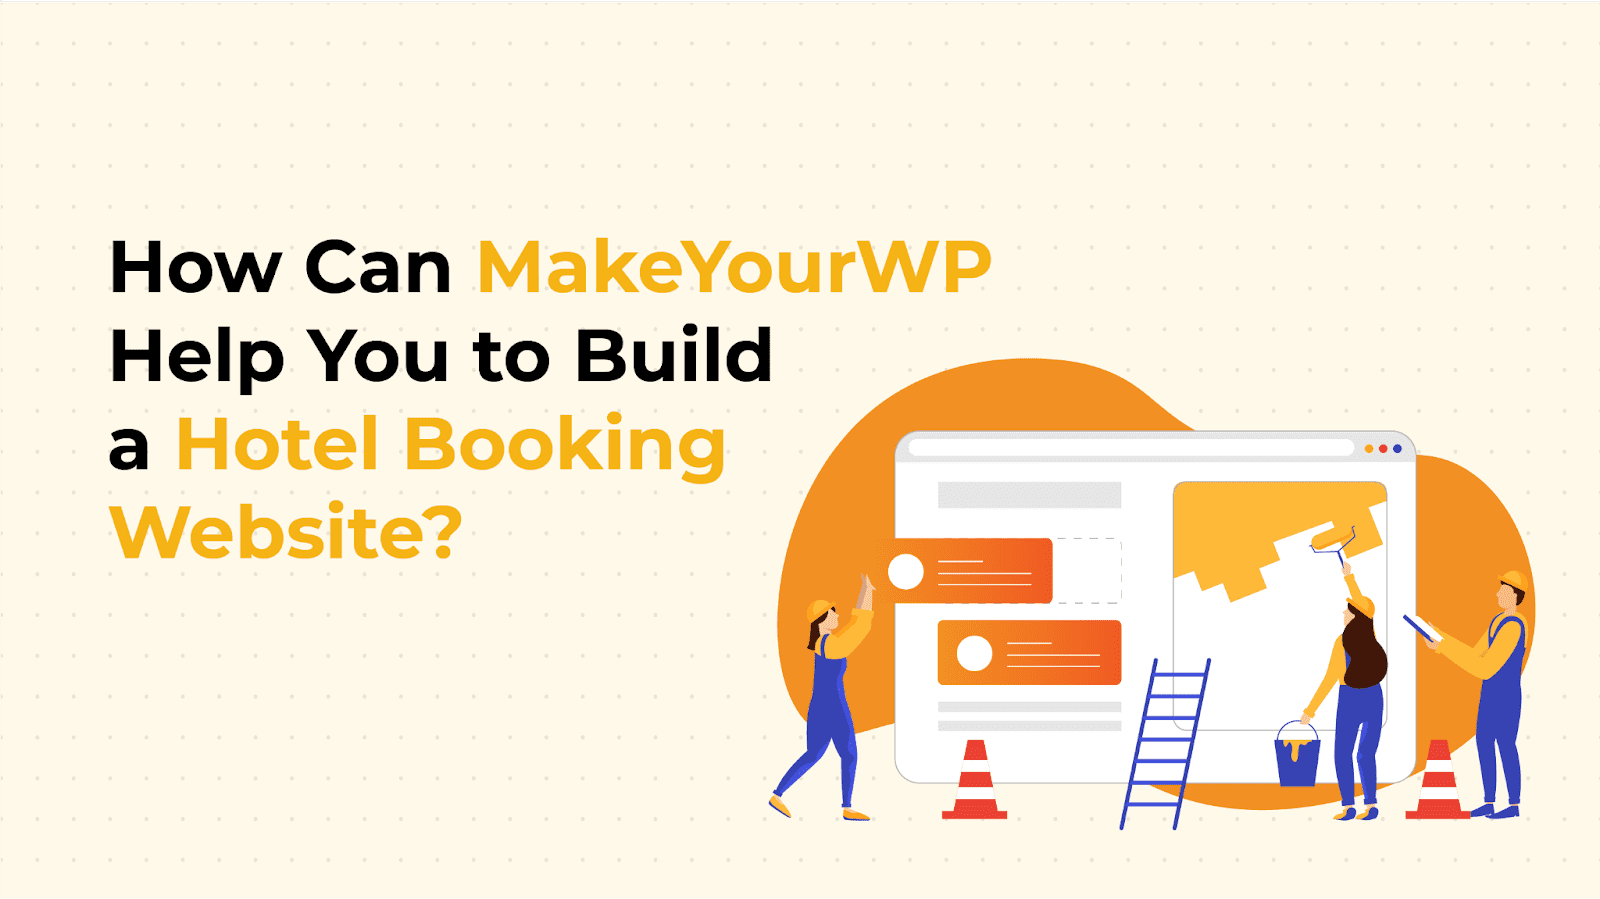 Readymade Hotel Booking Website from MakeYourWP